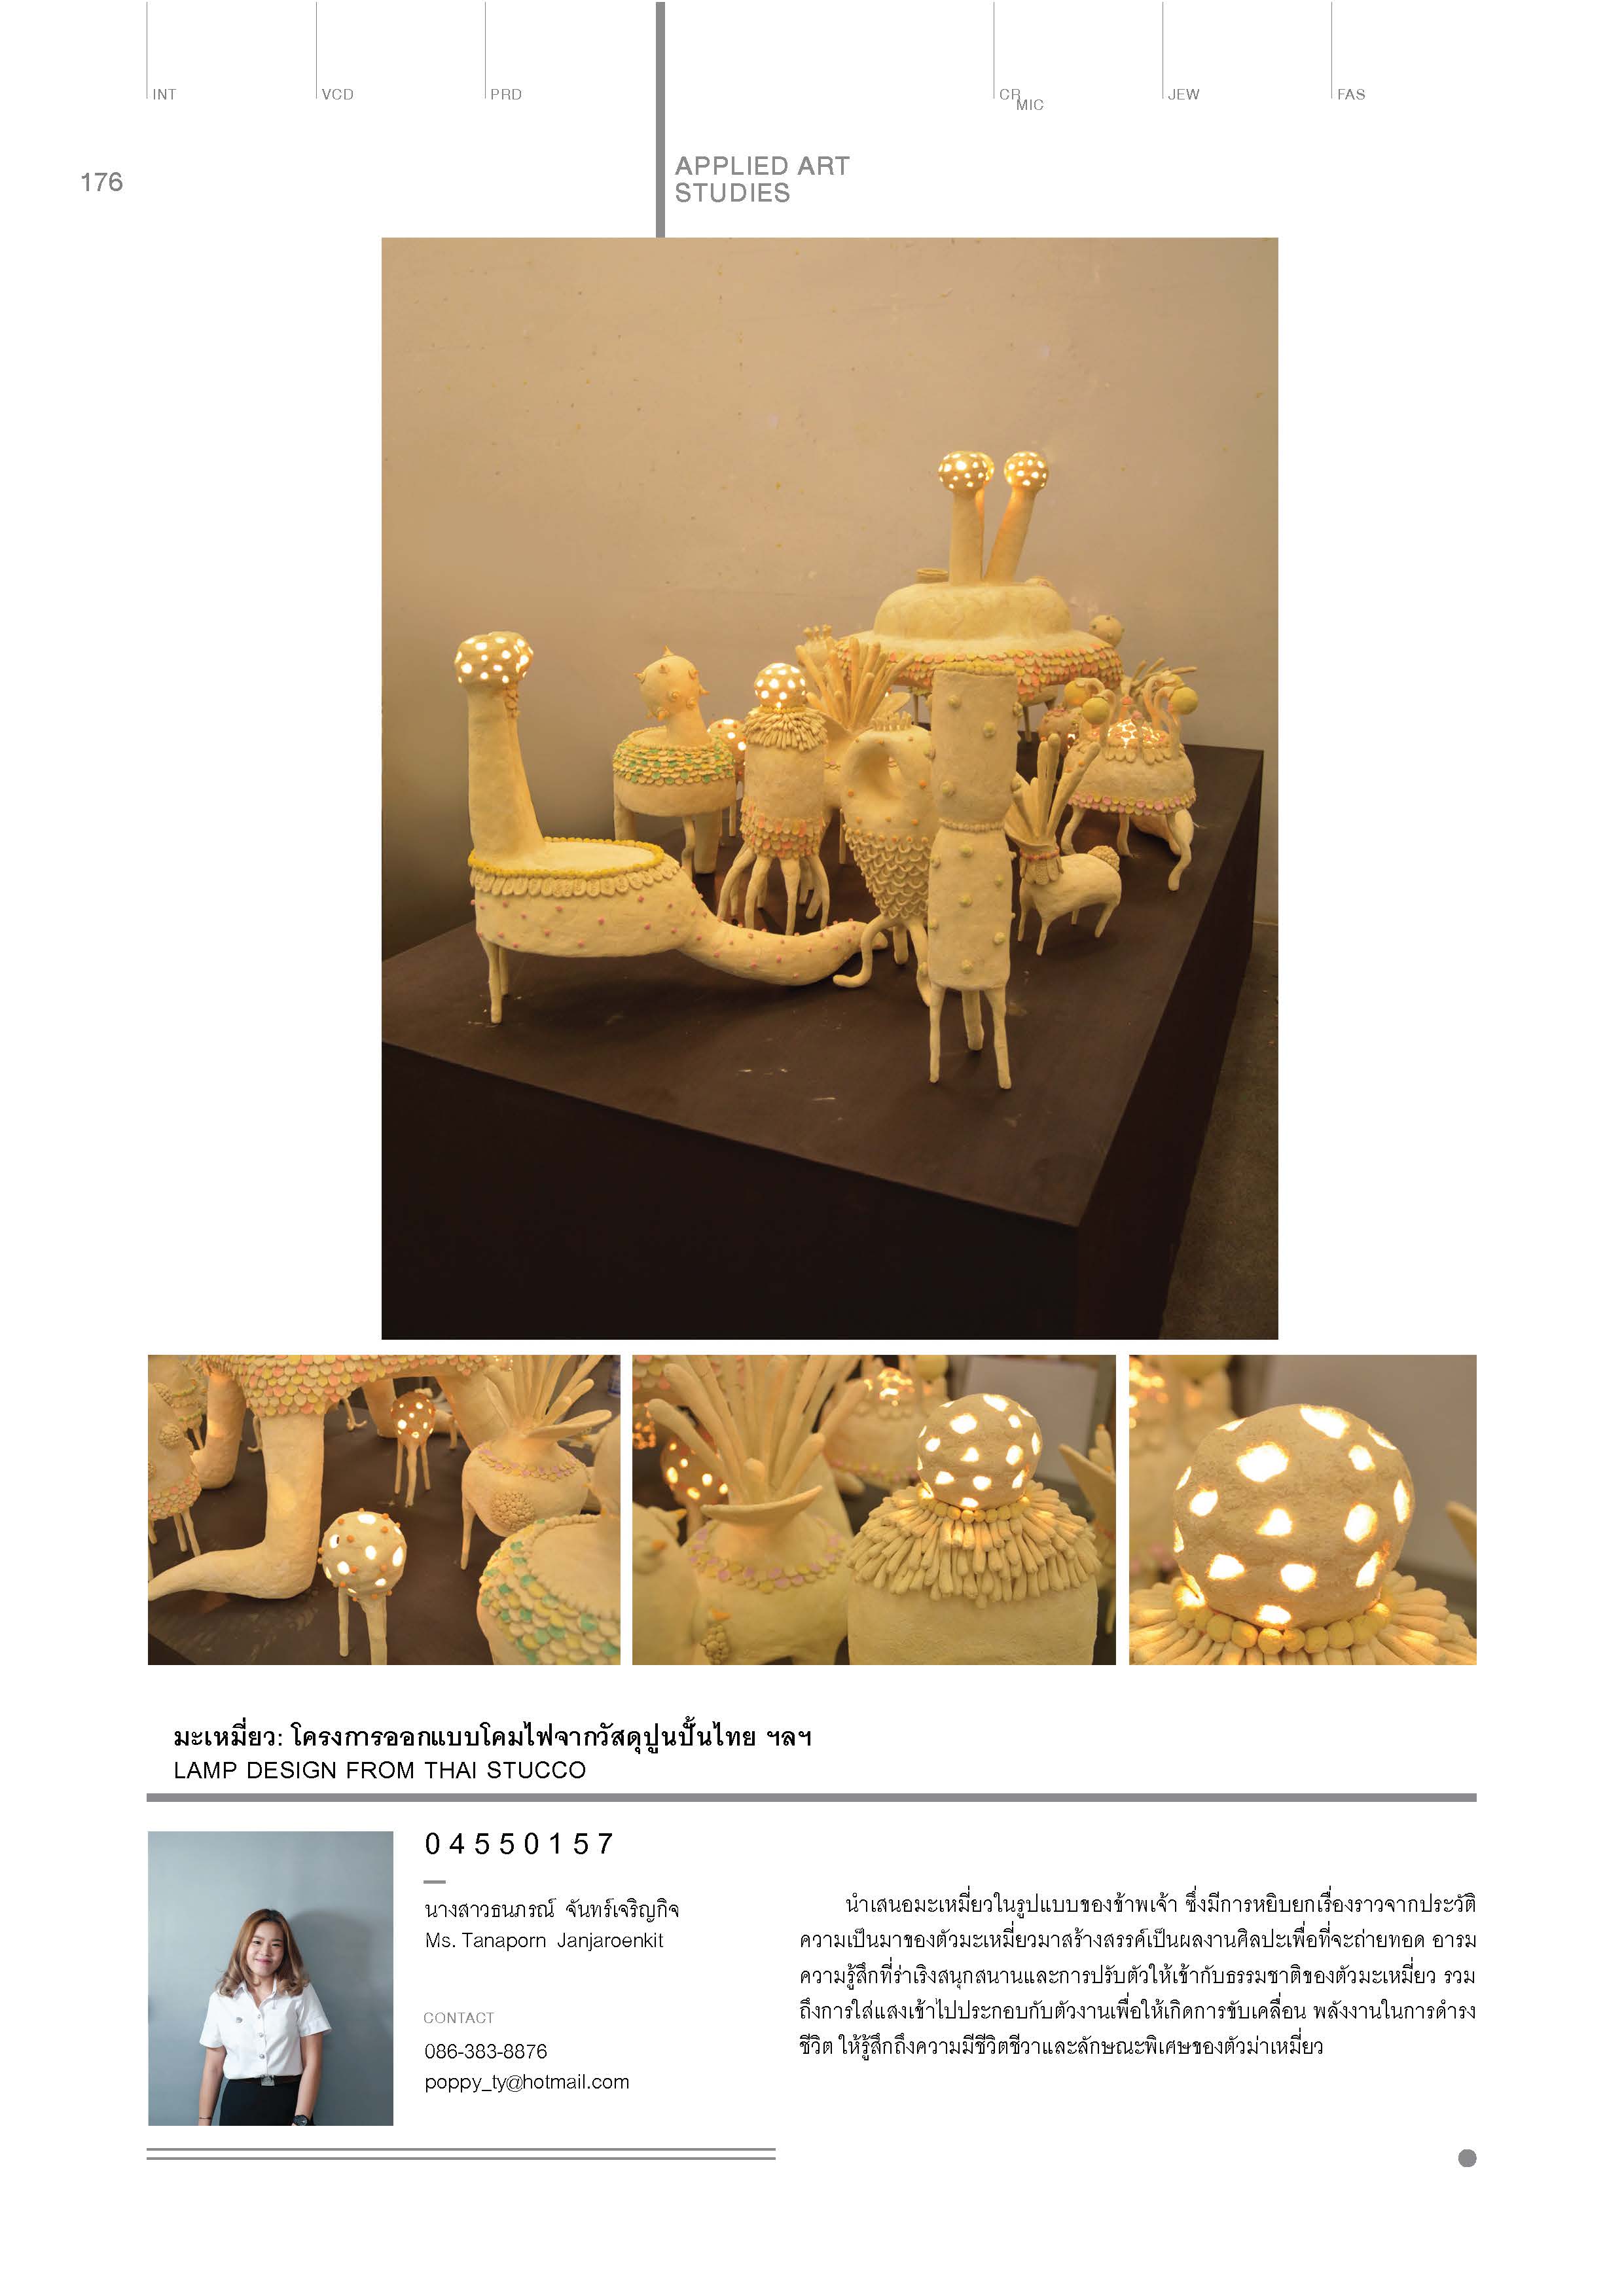 Photosynthesis-The46th_Art_Thesis_Exhibition_Decorative_Arts_Page_196